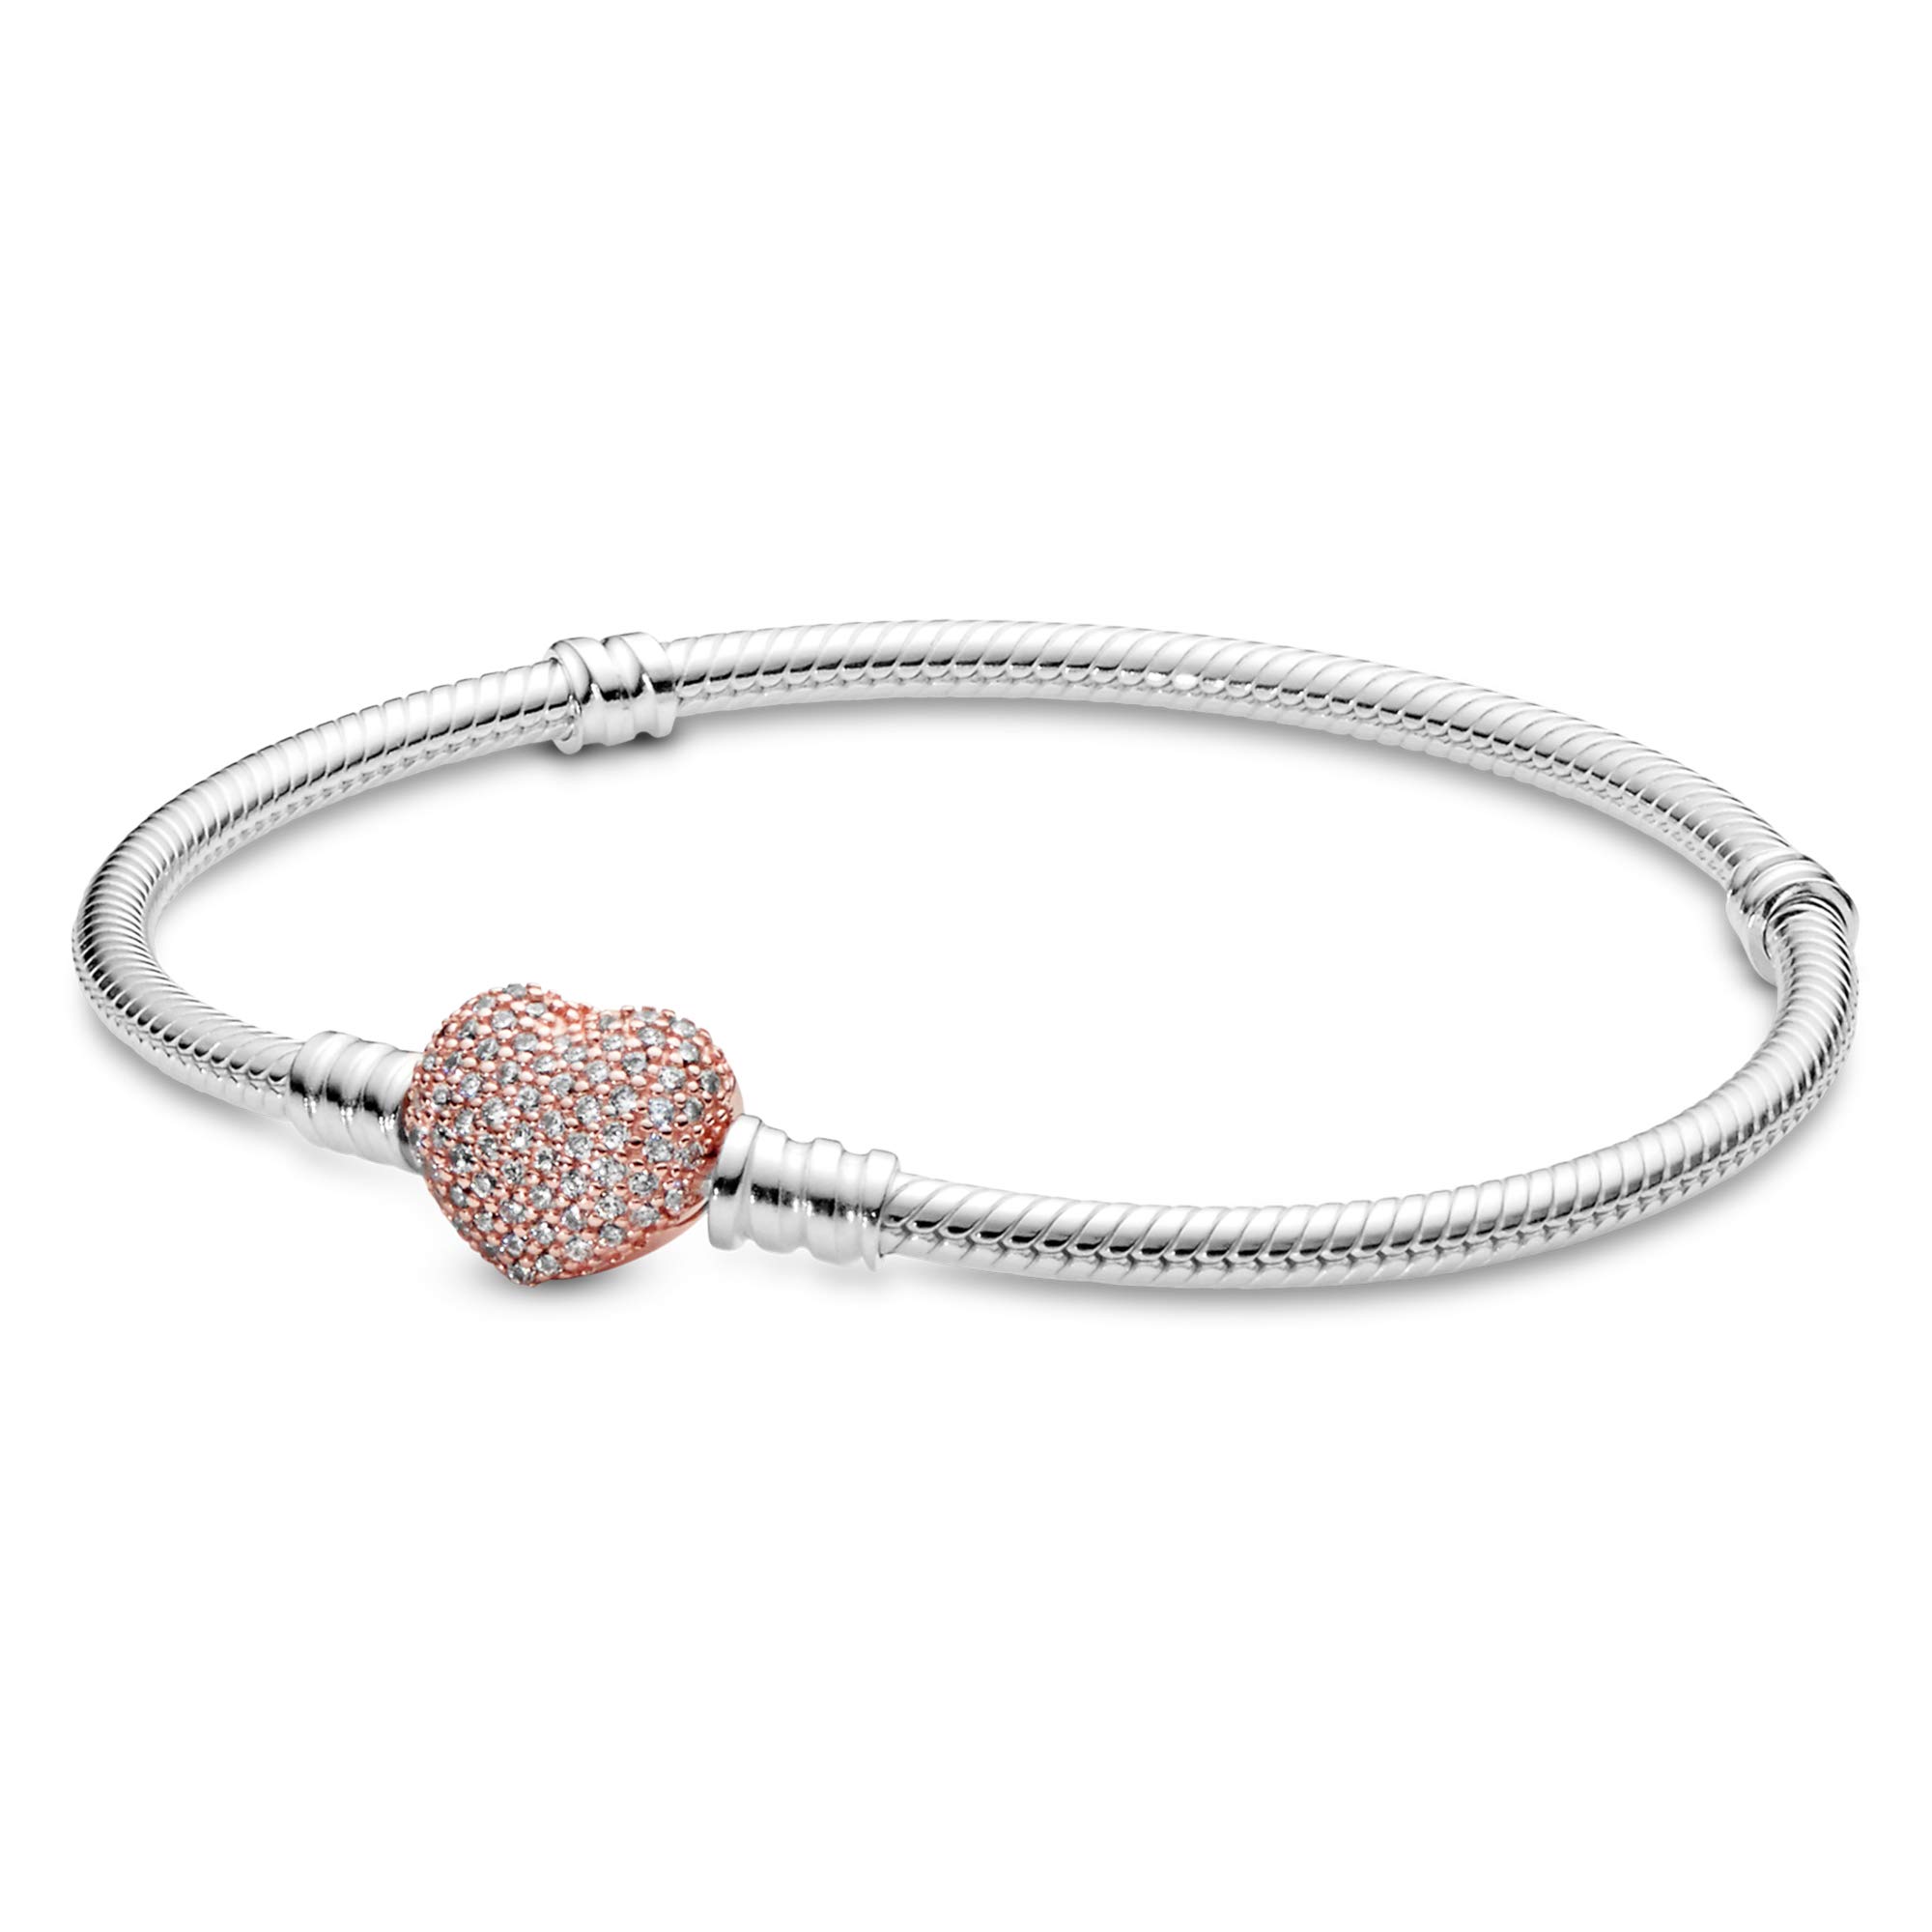 PANDORA Jewelry Moments Pave Heart Clasp Snake Chain Cubic Zirconia Bracelet in Rose, 7.1", No Box